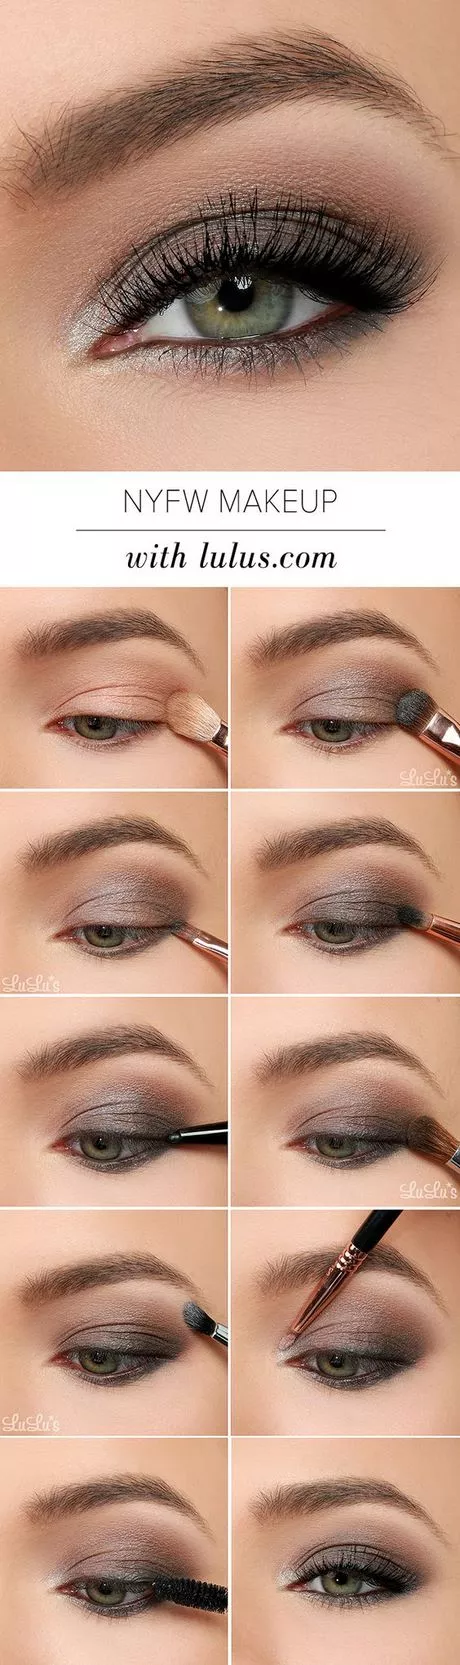 night-out-makeup-tutorial-for-green-eyes-74_13-6 Night out make-up tutorial voor groene ogen